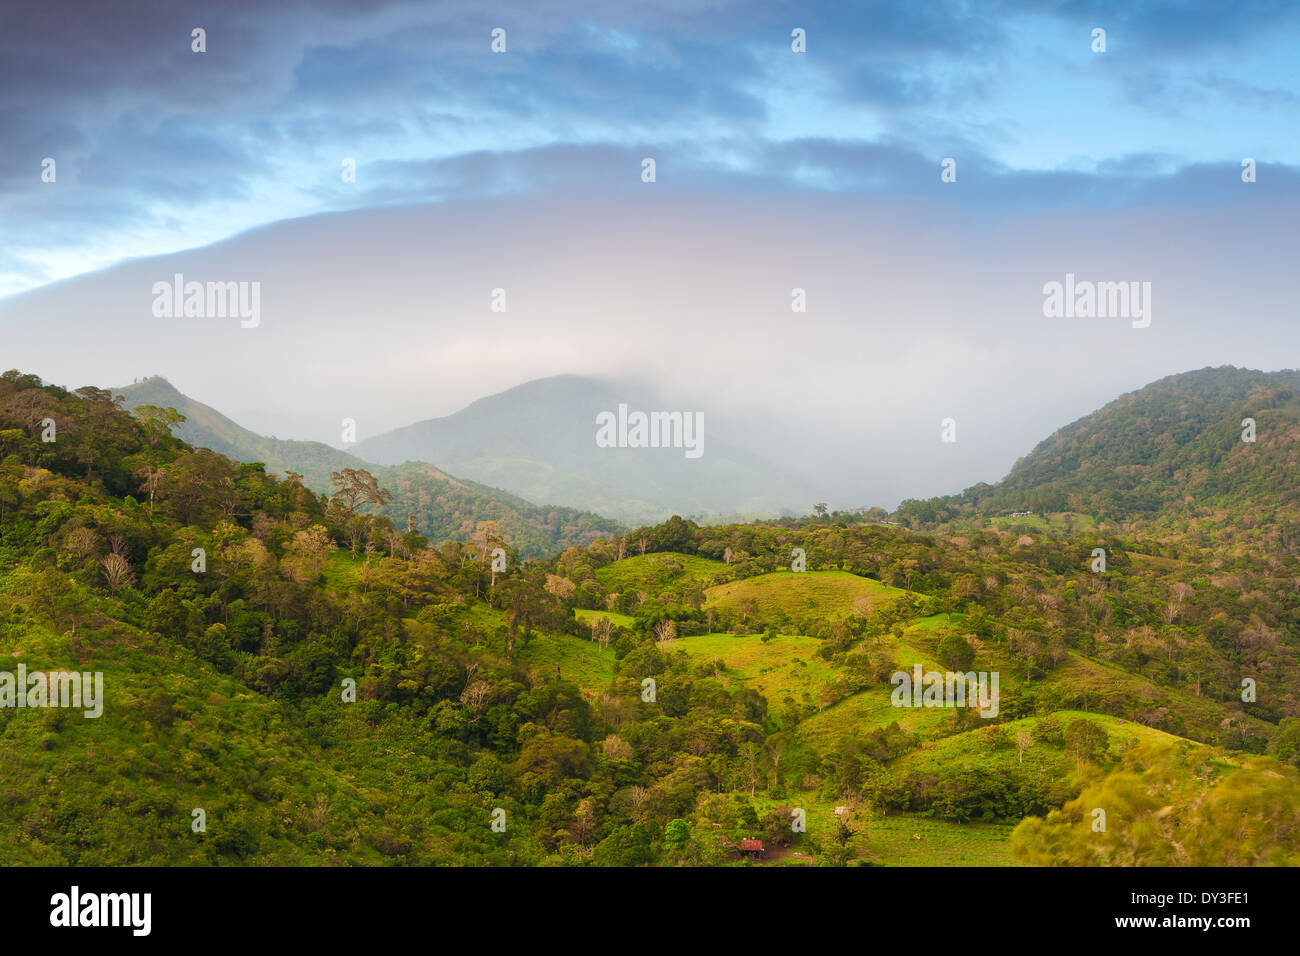 Farmlands and forested hillsides between the villages Rio Sereno and Volcan in the Chiriqui province, Republic of Panama. Stock Photo